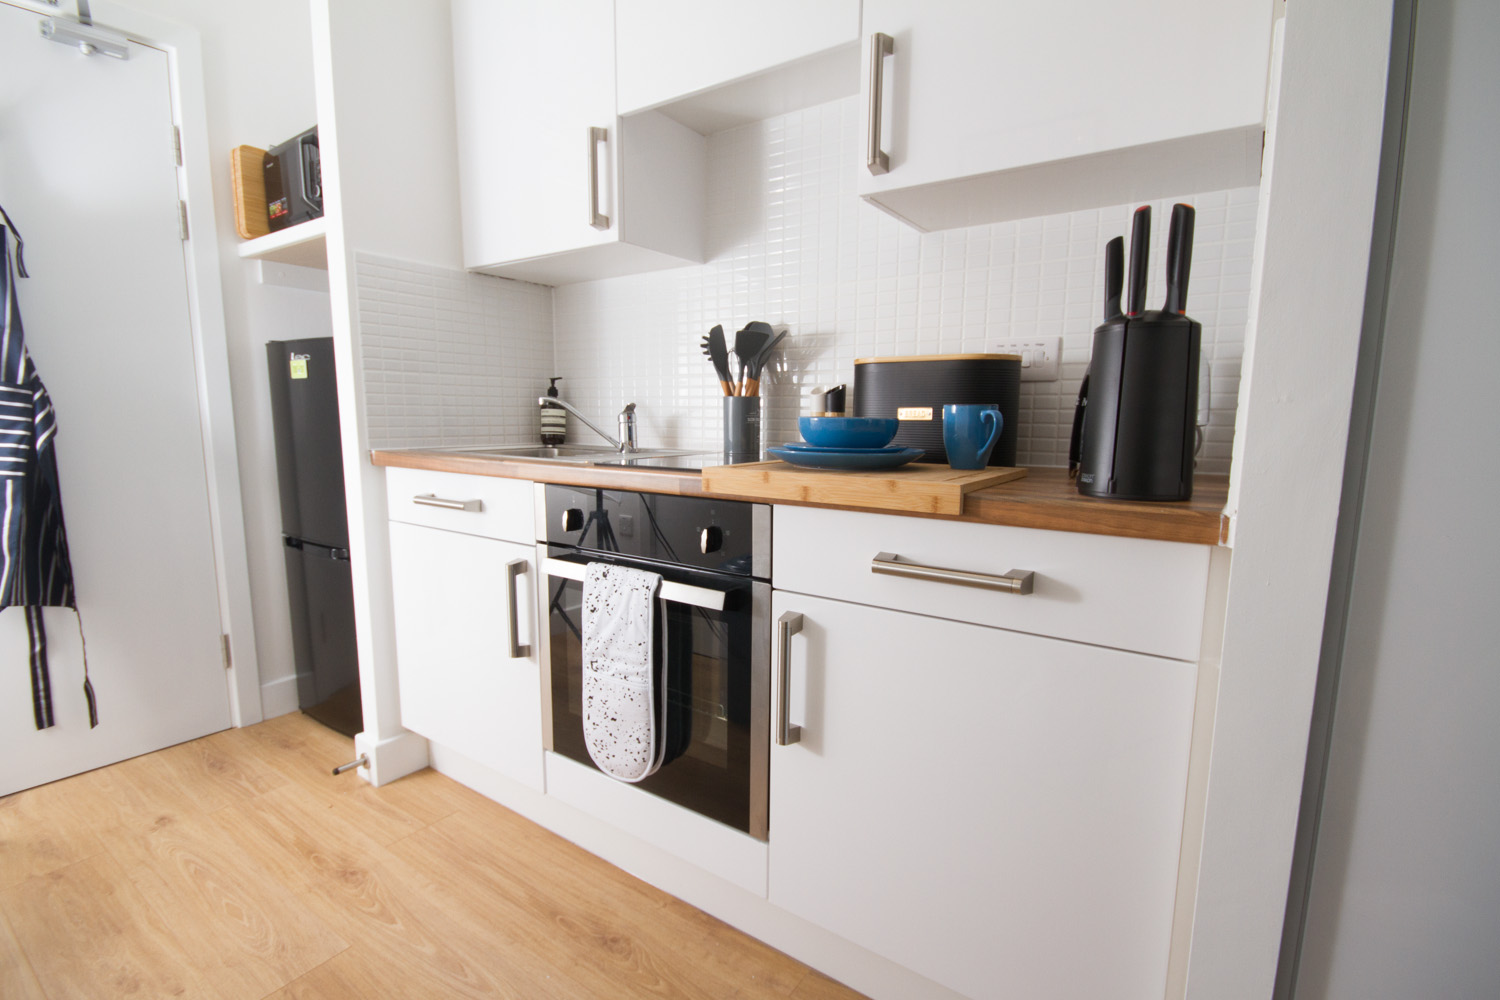 Kitchen in the River Studio CODE Student Accommodation Leicester